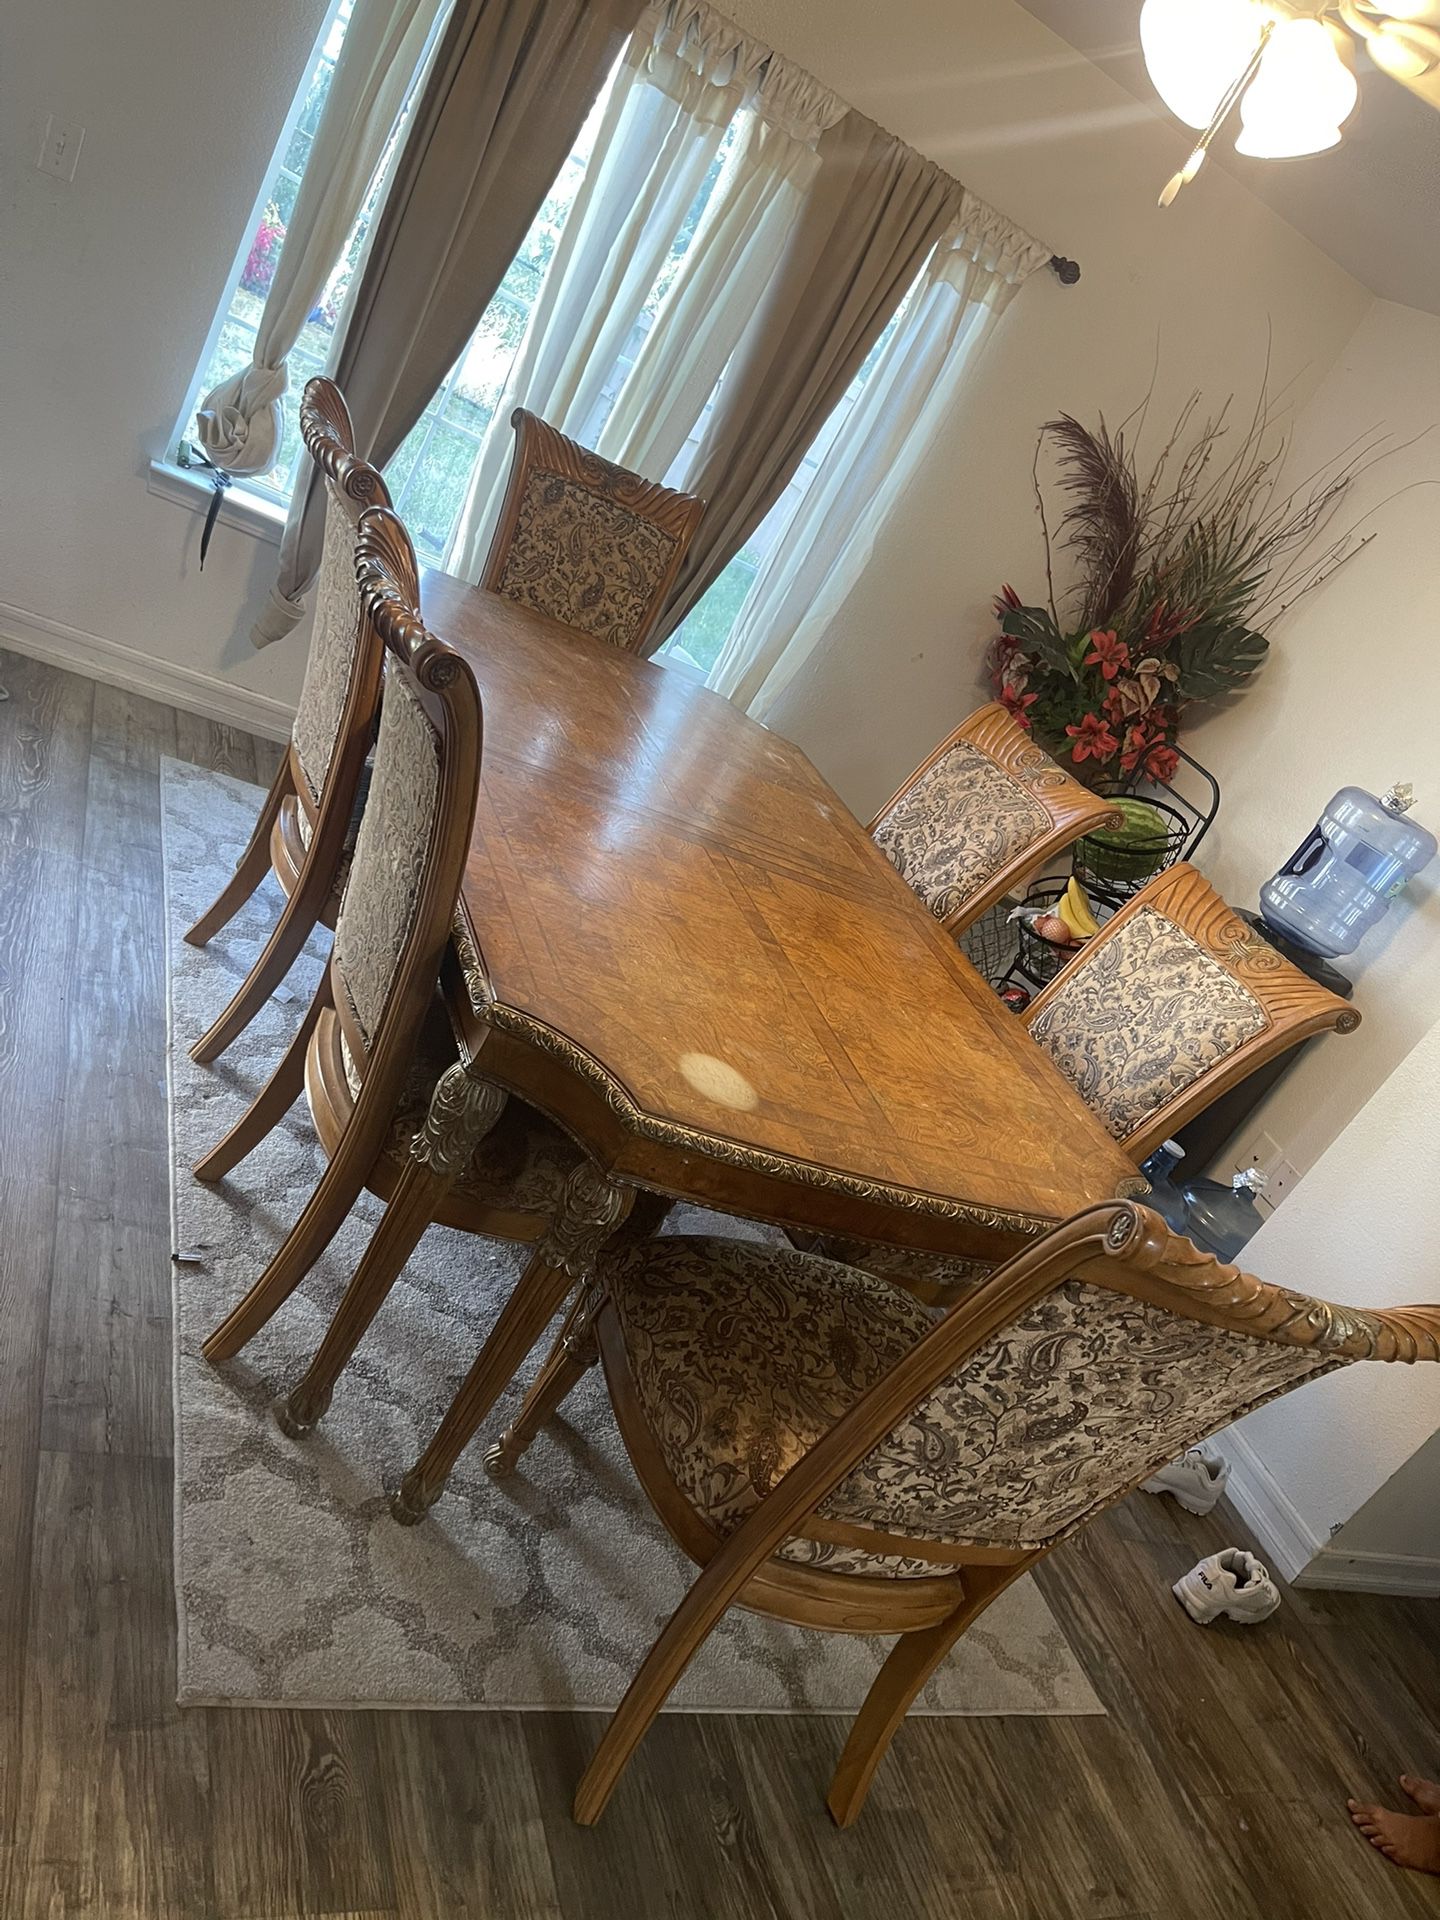 Dining Table + 6 Chairs + Floral Arrangements + Rug